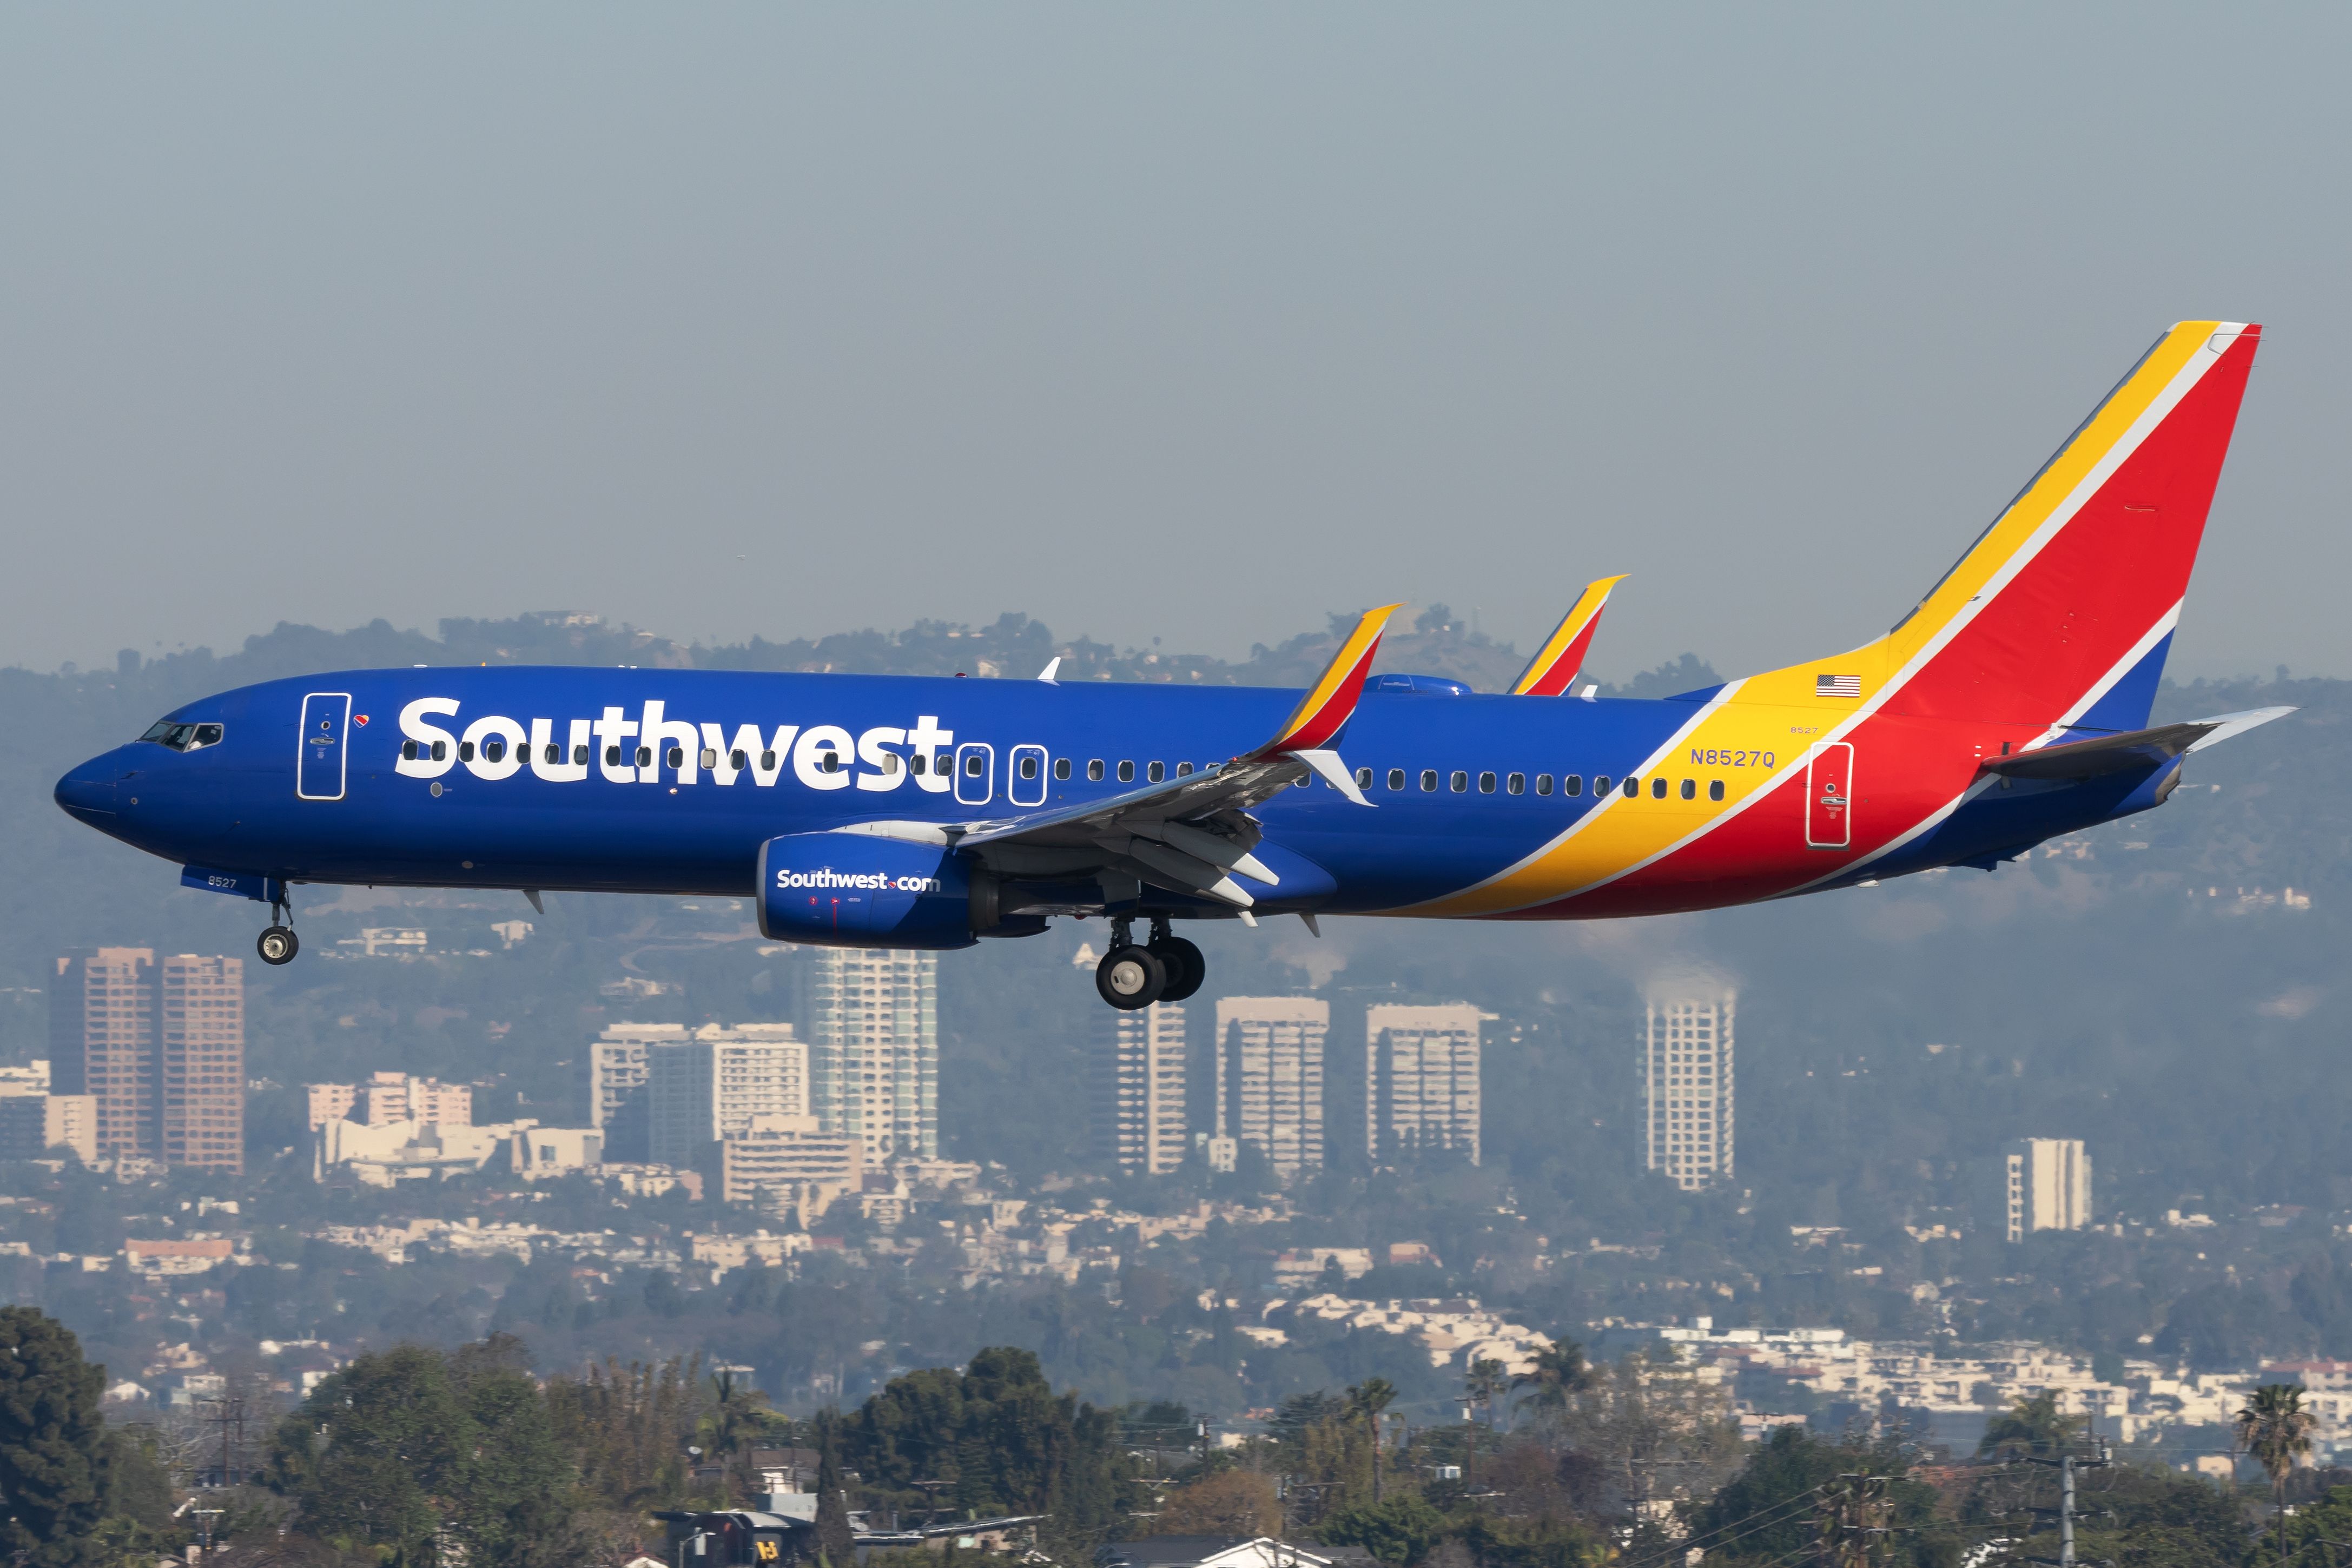 Southwest Airlines Boeing 737-800 on approach at Los Angeles International Airport